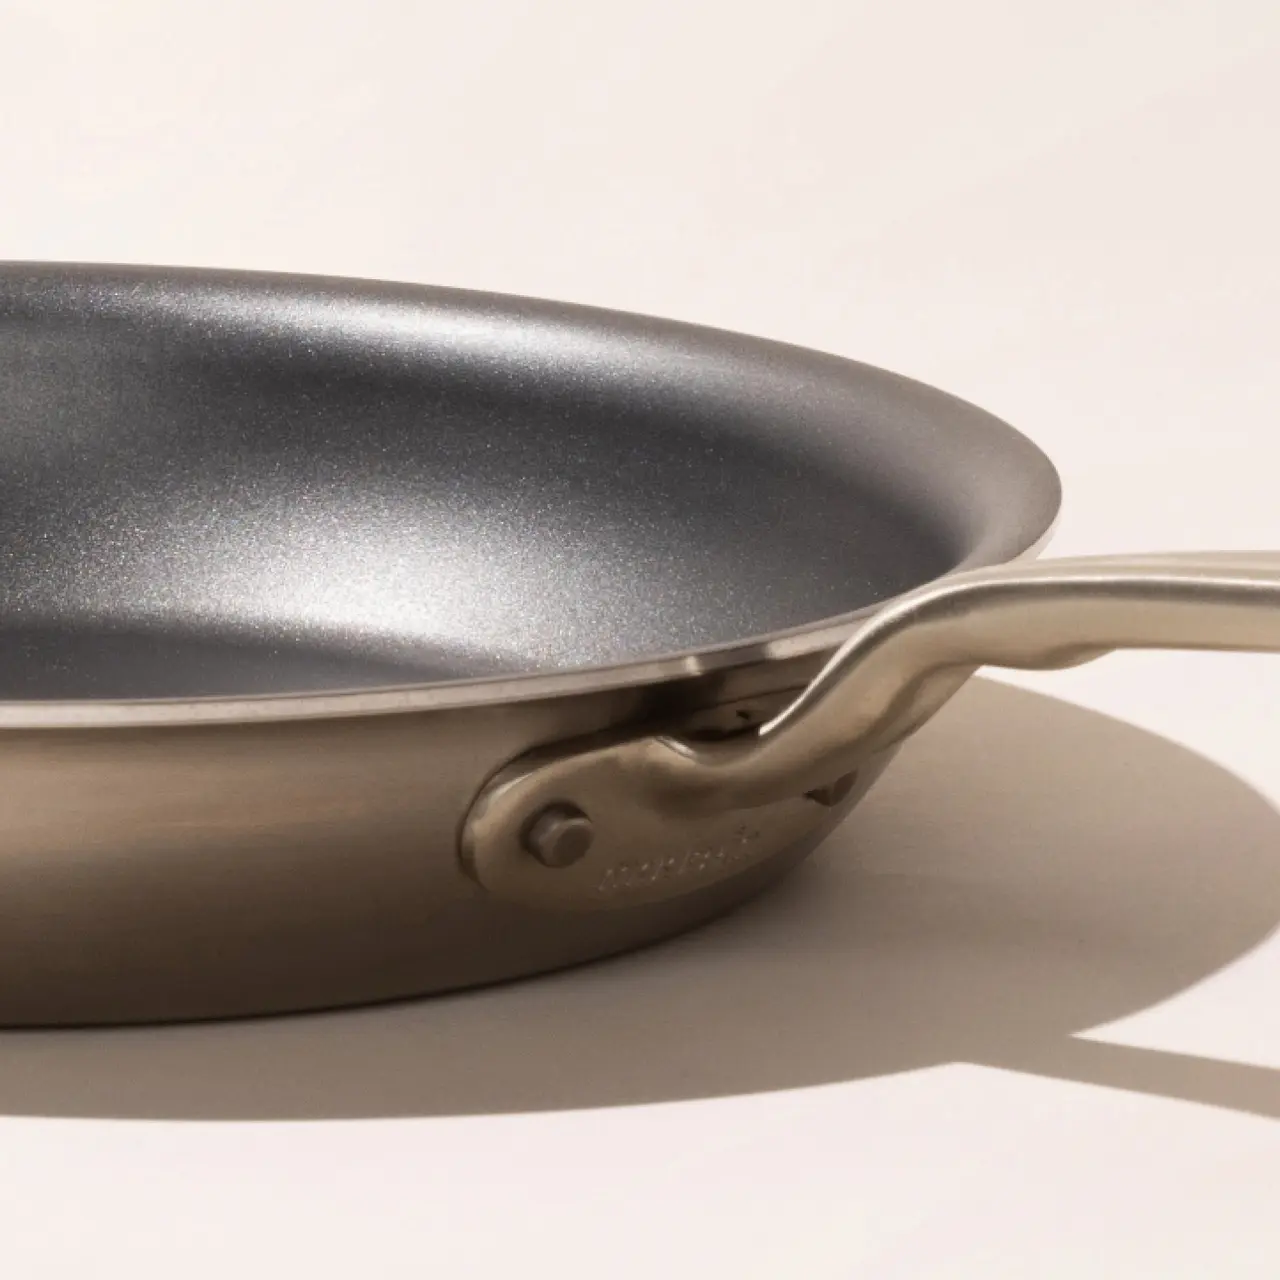 A close-up of a silver frying pan with a stainless steel handle, against a neutral background.